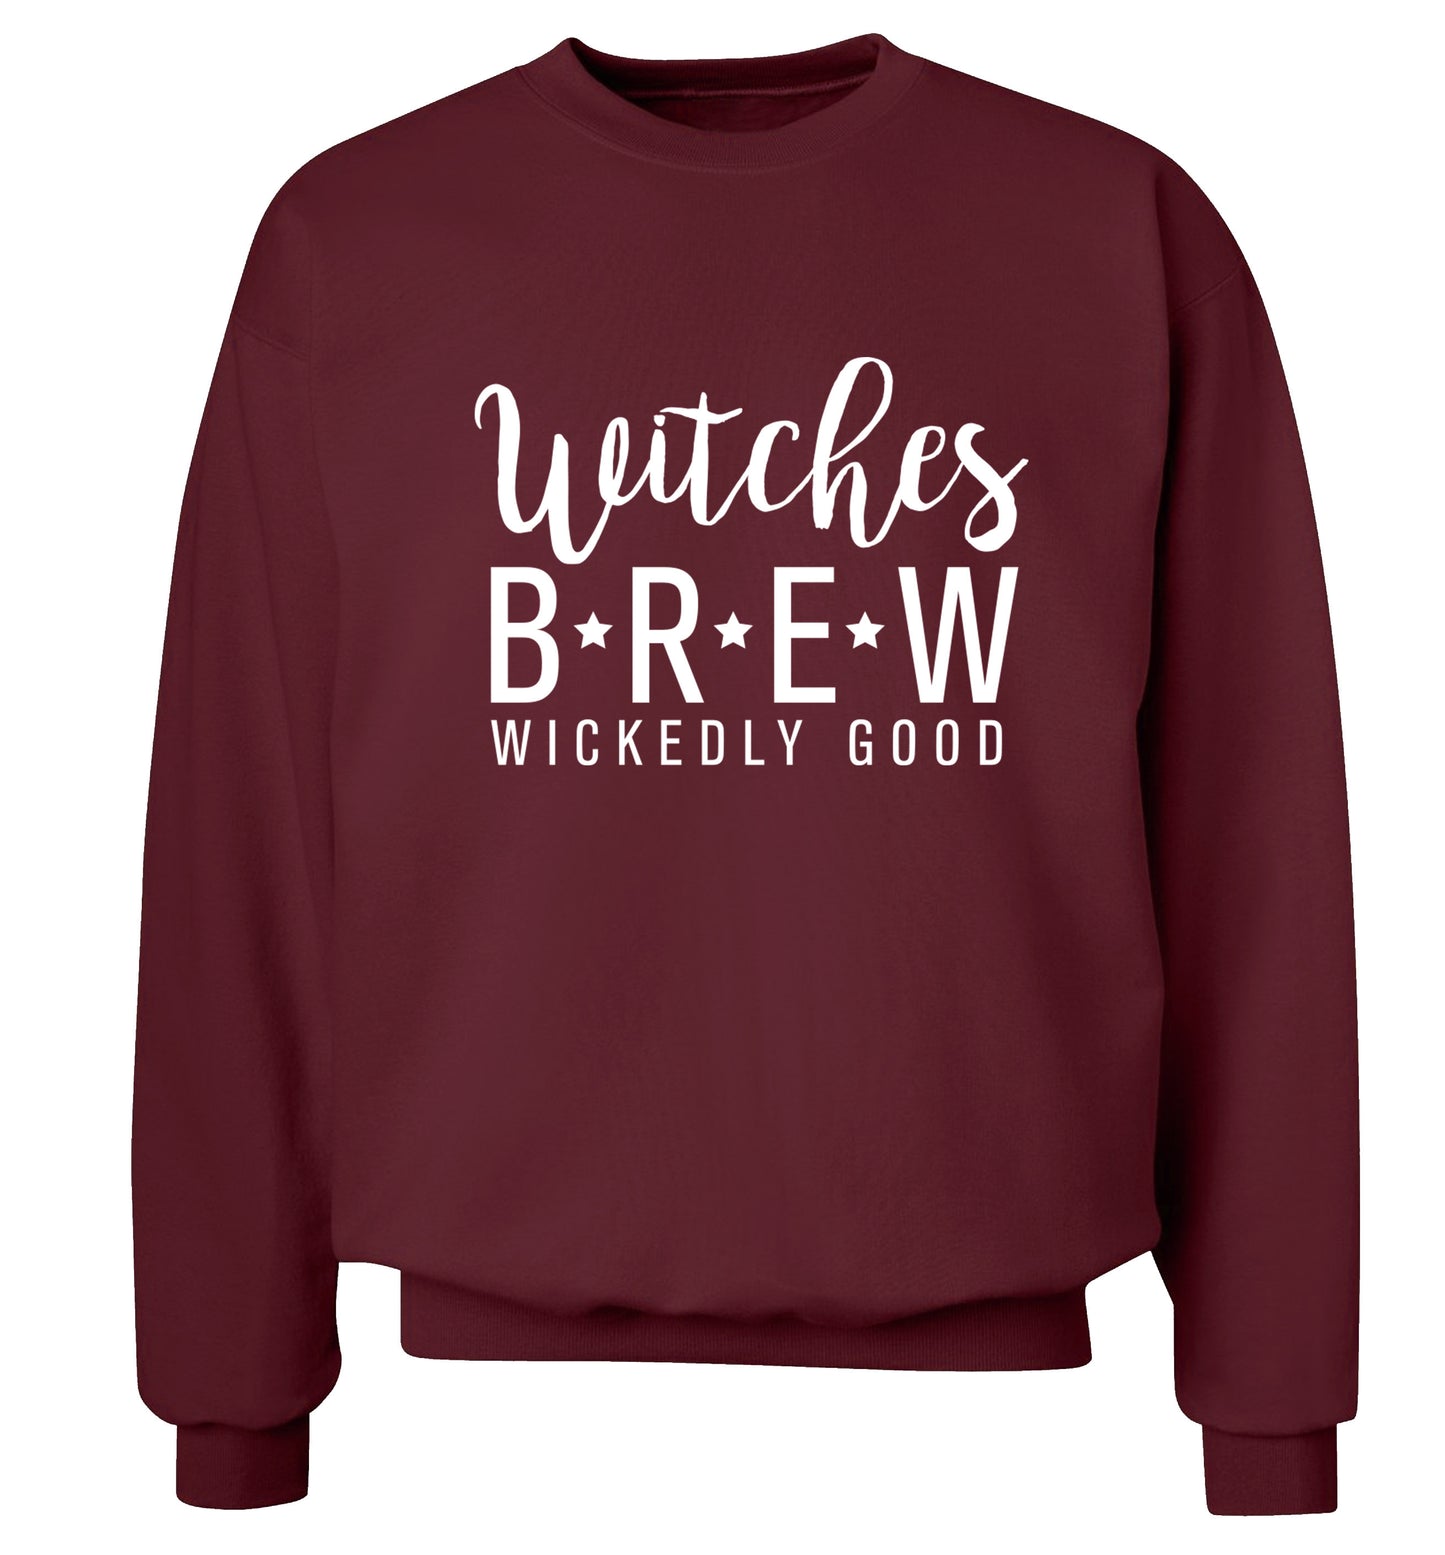 Witches Brew wickedly good Adult's unisex maroon Sweater 2XL